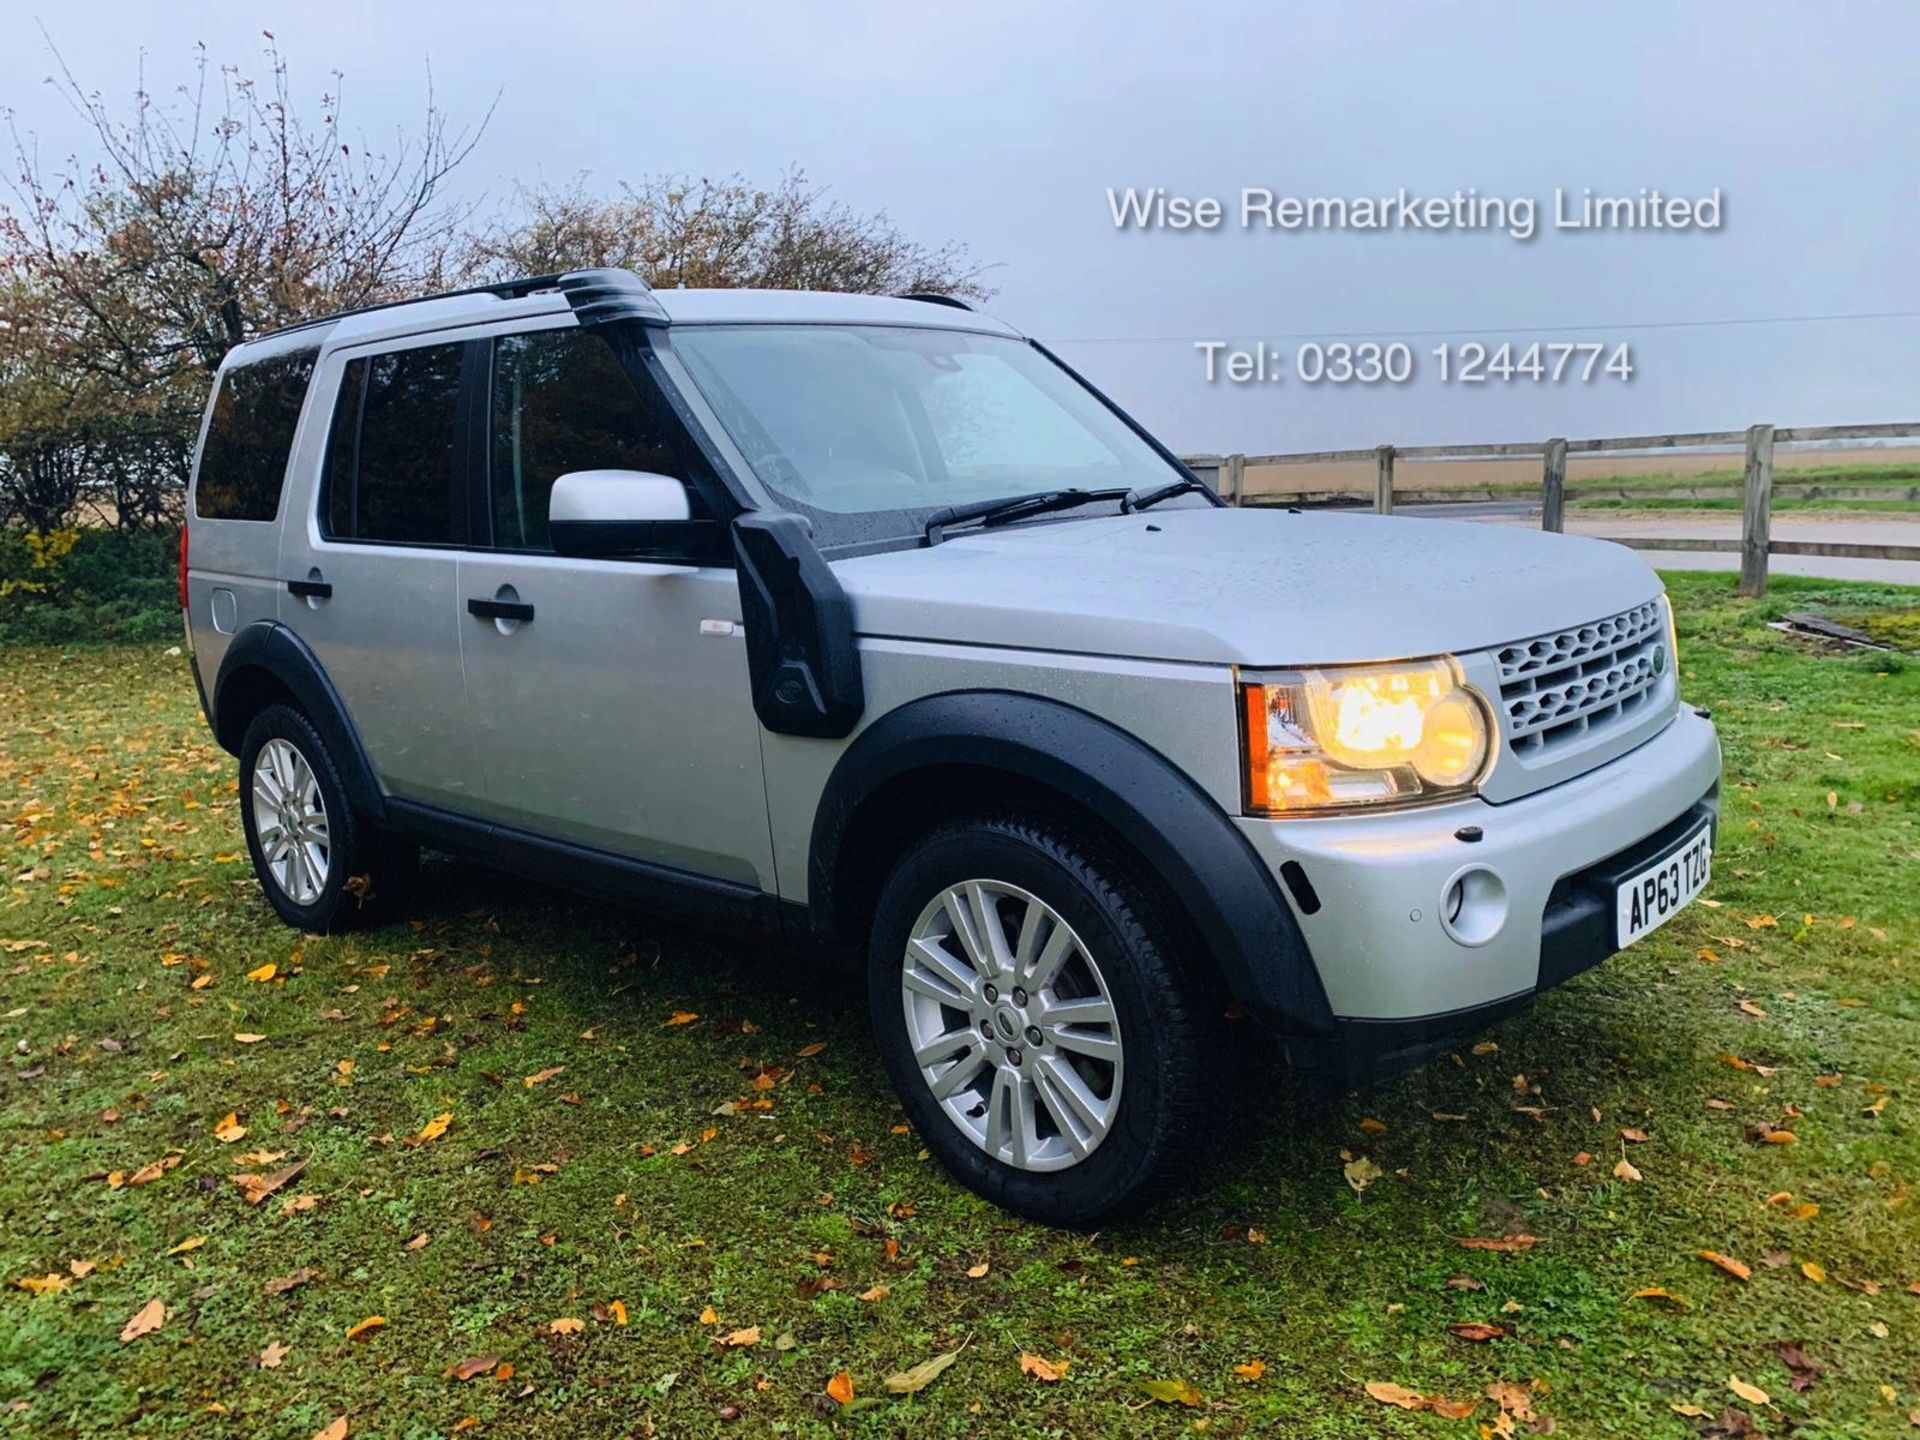 **RESERVE MET** Land Rover Discovery 3.0 SDV6 4x4 Utility Commercial - Auto - 1 Keeper - 2014 Model - Image 7 of 28